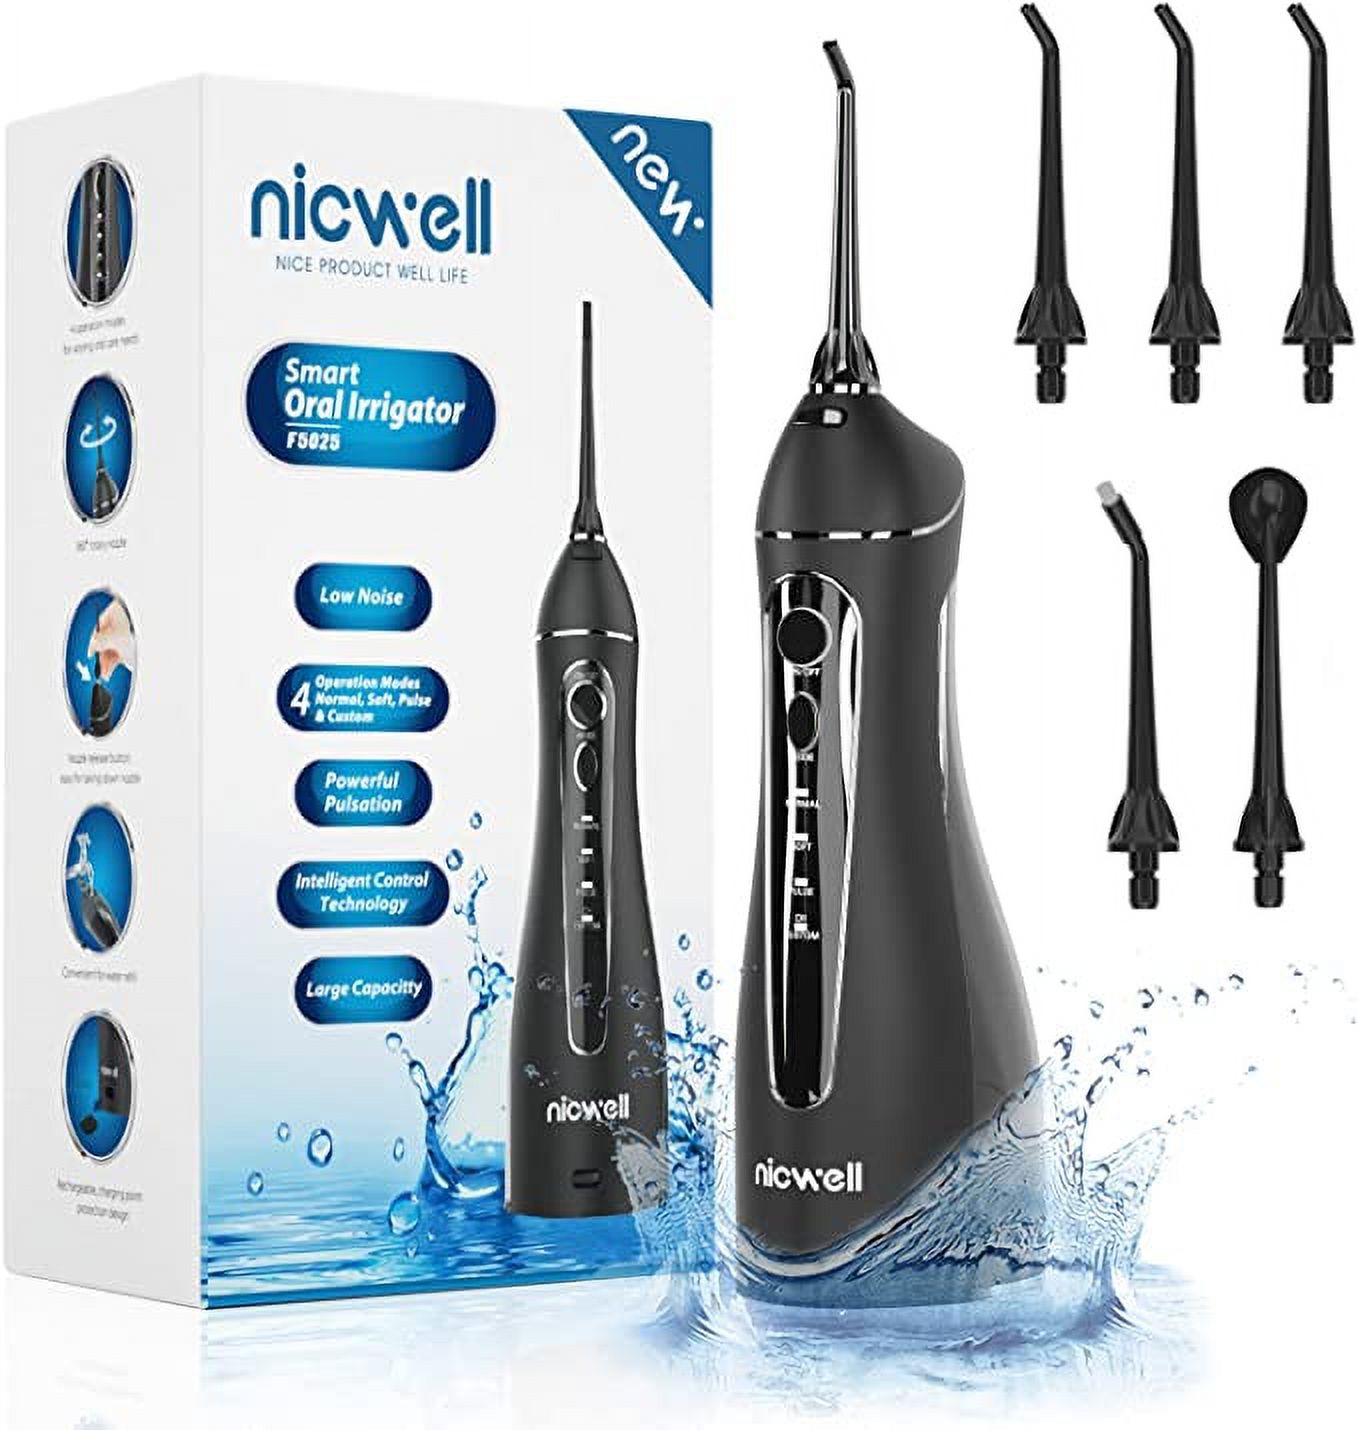 Water Dental Flosser Cordless for Teeth - Nicwell 4 Modes Dental Oral Irrigator, Portable and Rechargeable IPX7 Waterproof Powerful Battery Life Water Teeth Cleaner Picks for Home Travel Black - image 1 of 6